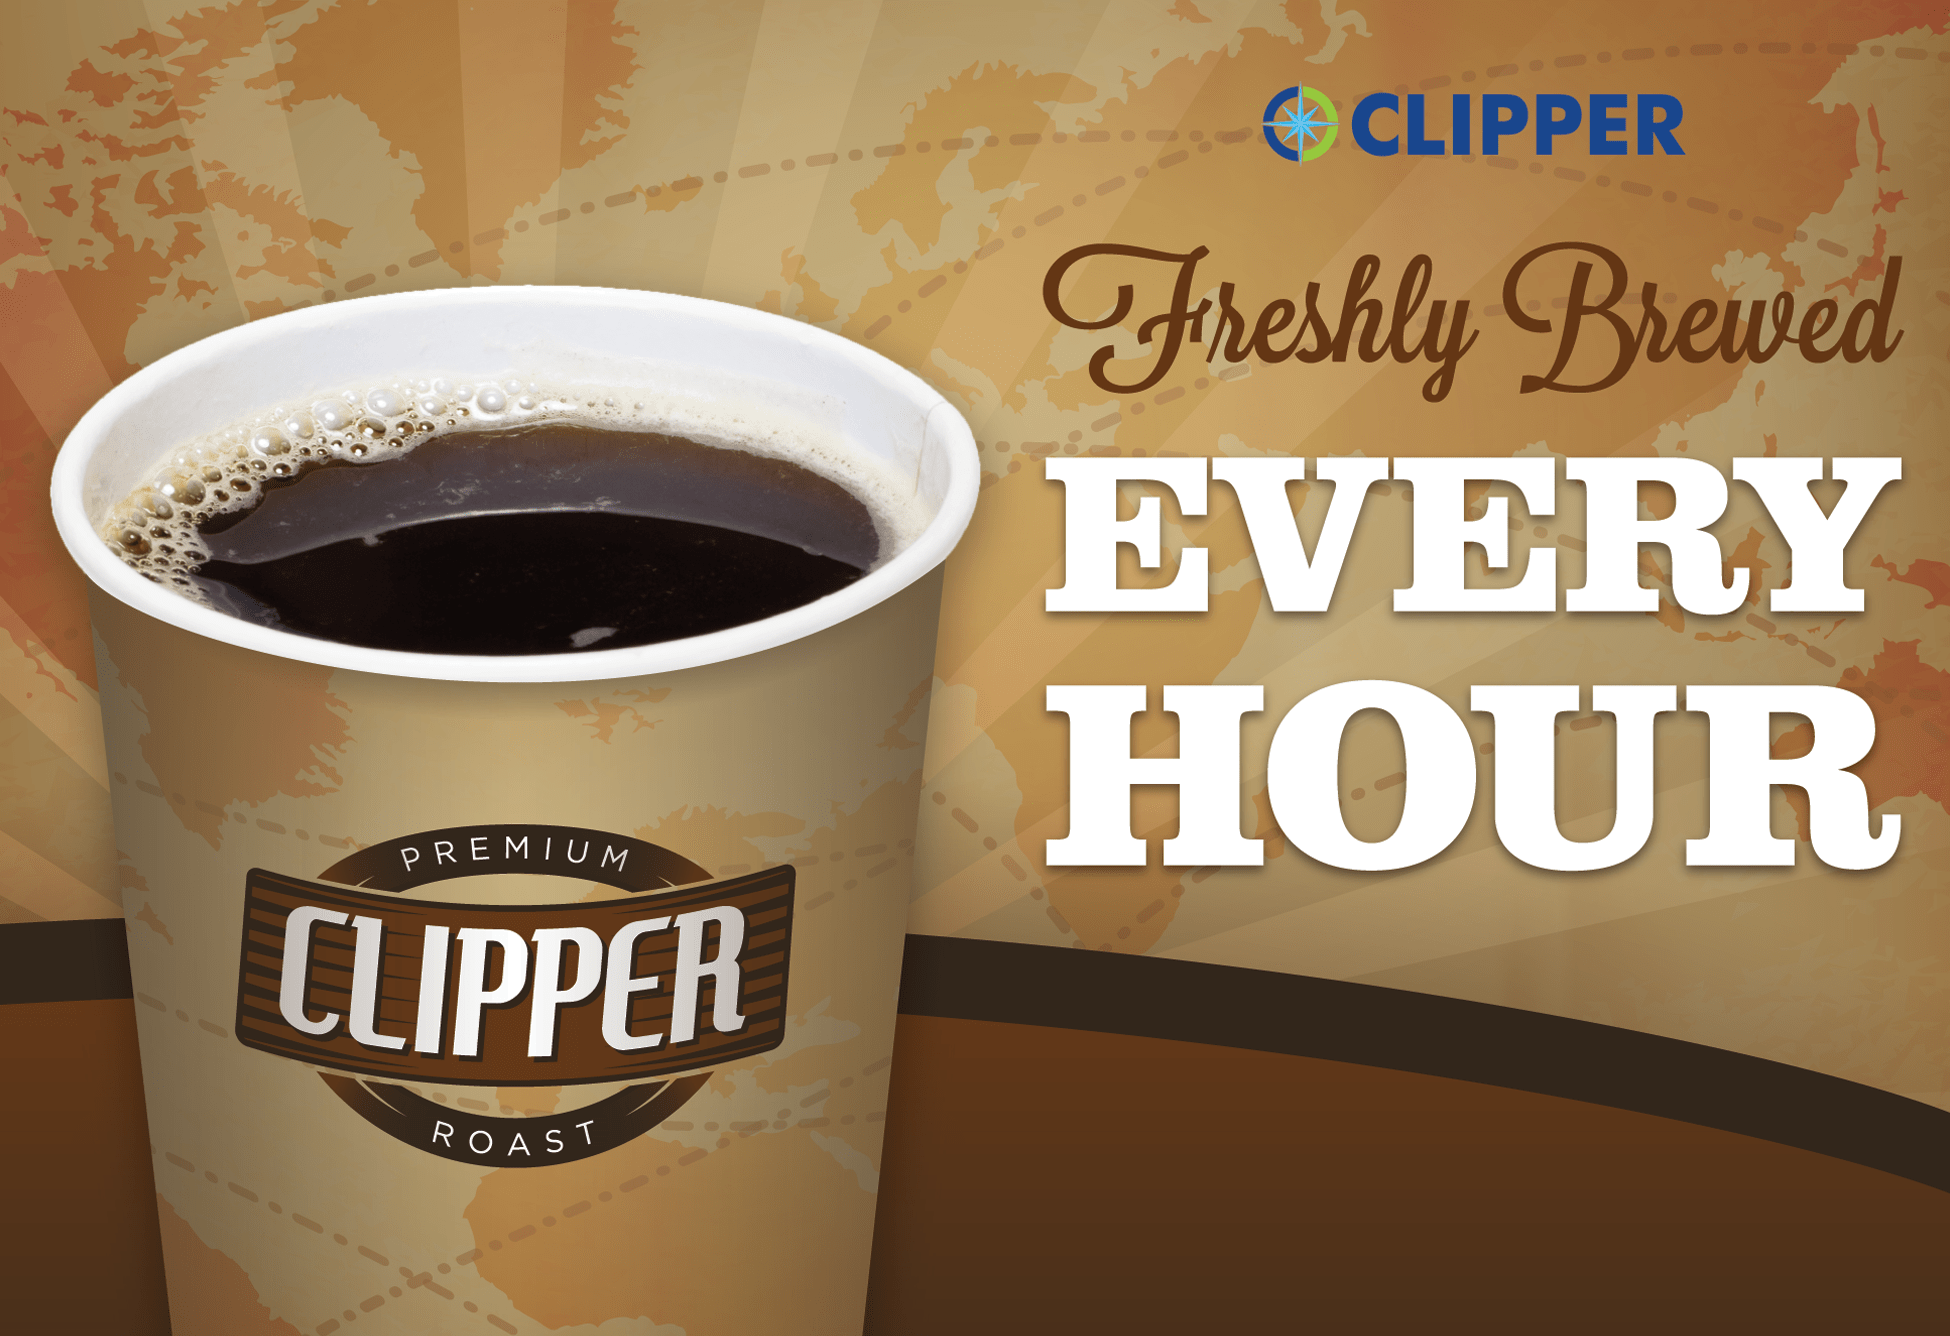 Clipper Coffee Fresh Brewed Every Hour